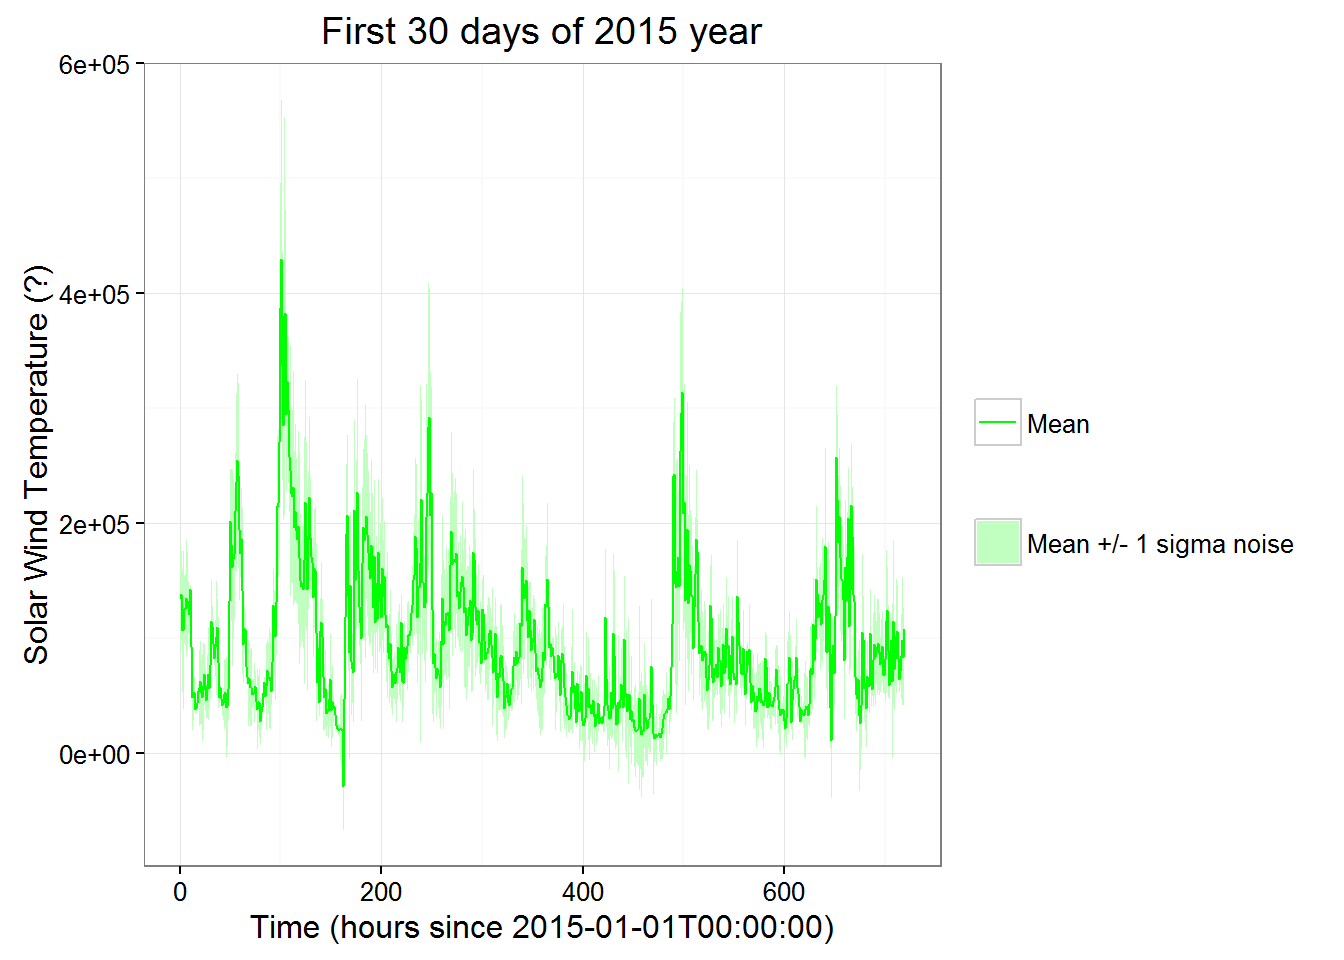 solar wind observations - temperature: first 30 days of 2015